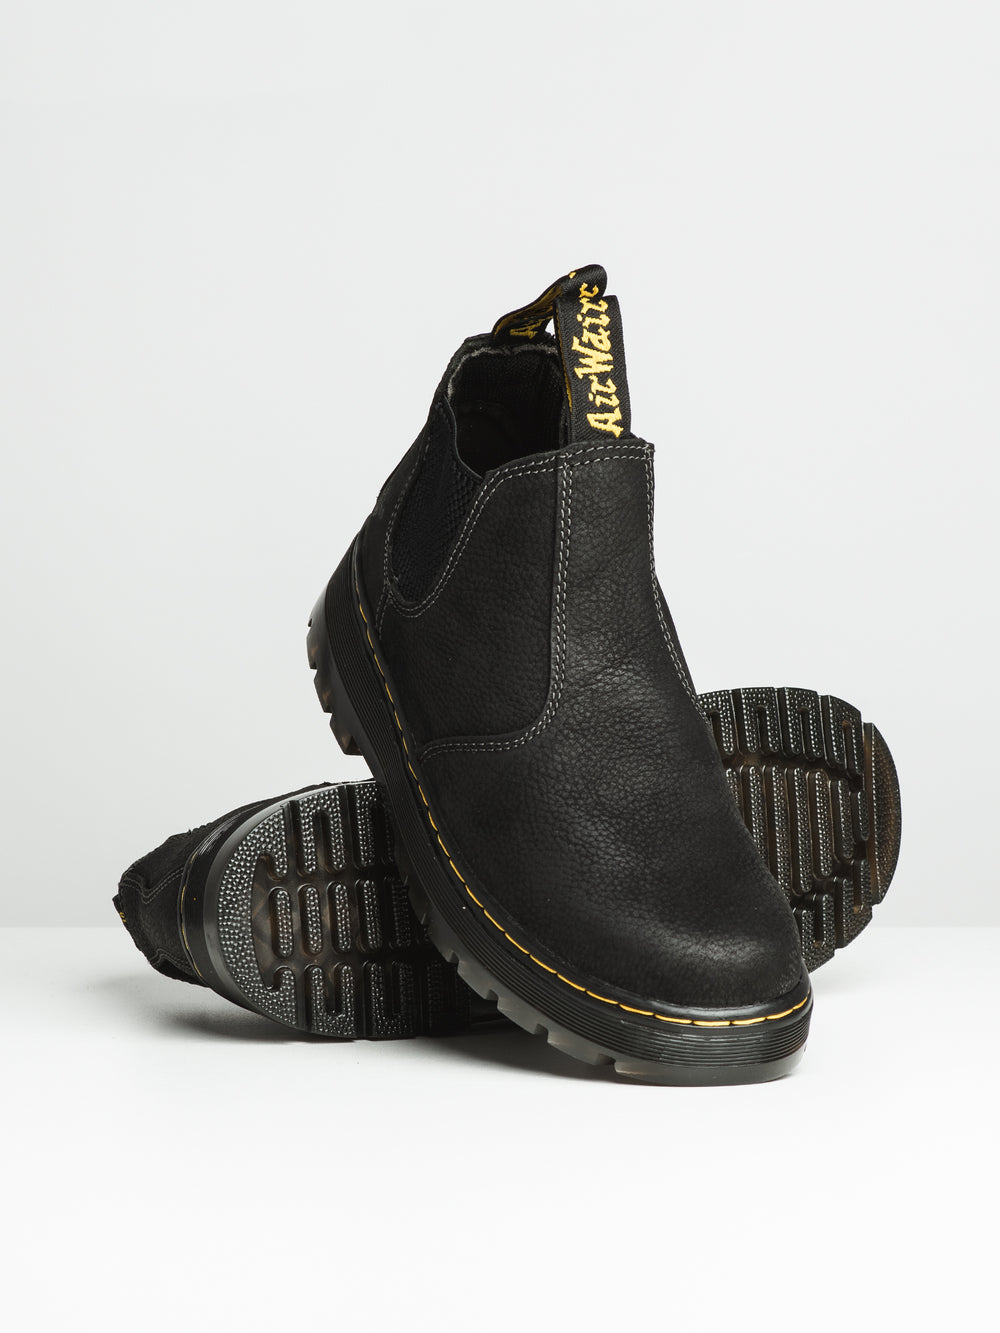 MENS DR MARTENS HARDIE BOOTS - CLEARANCE